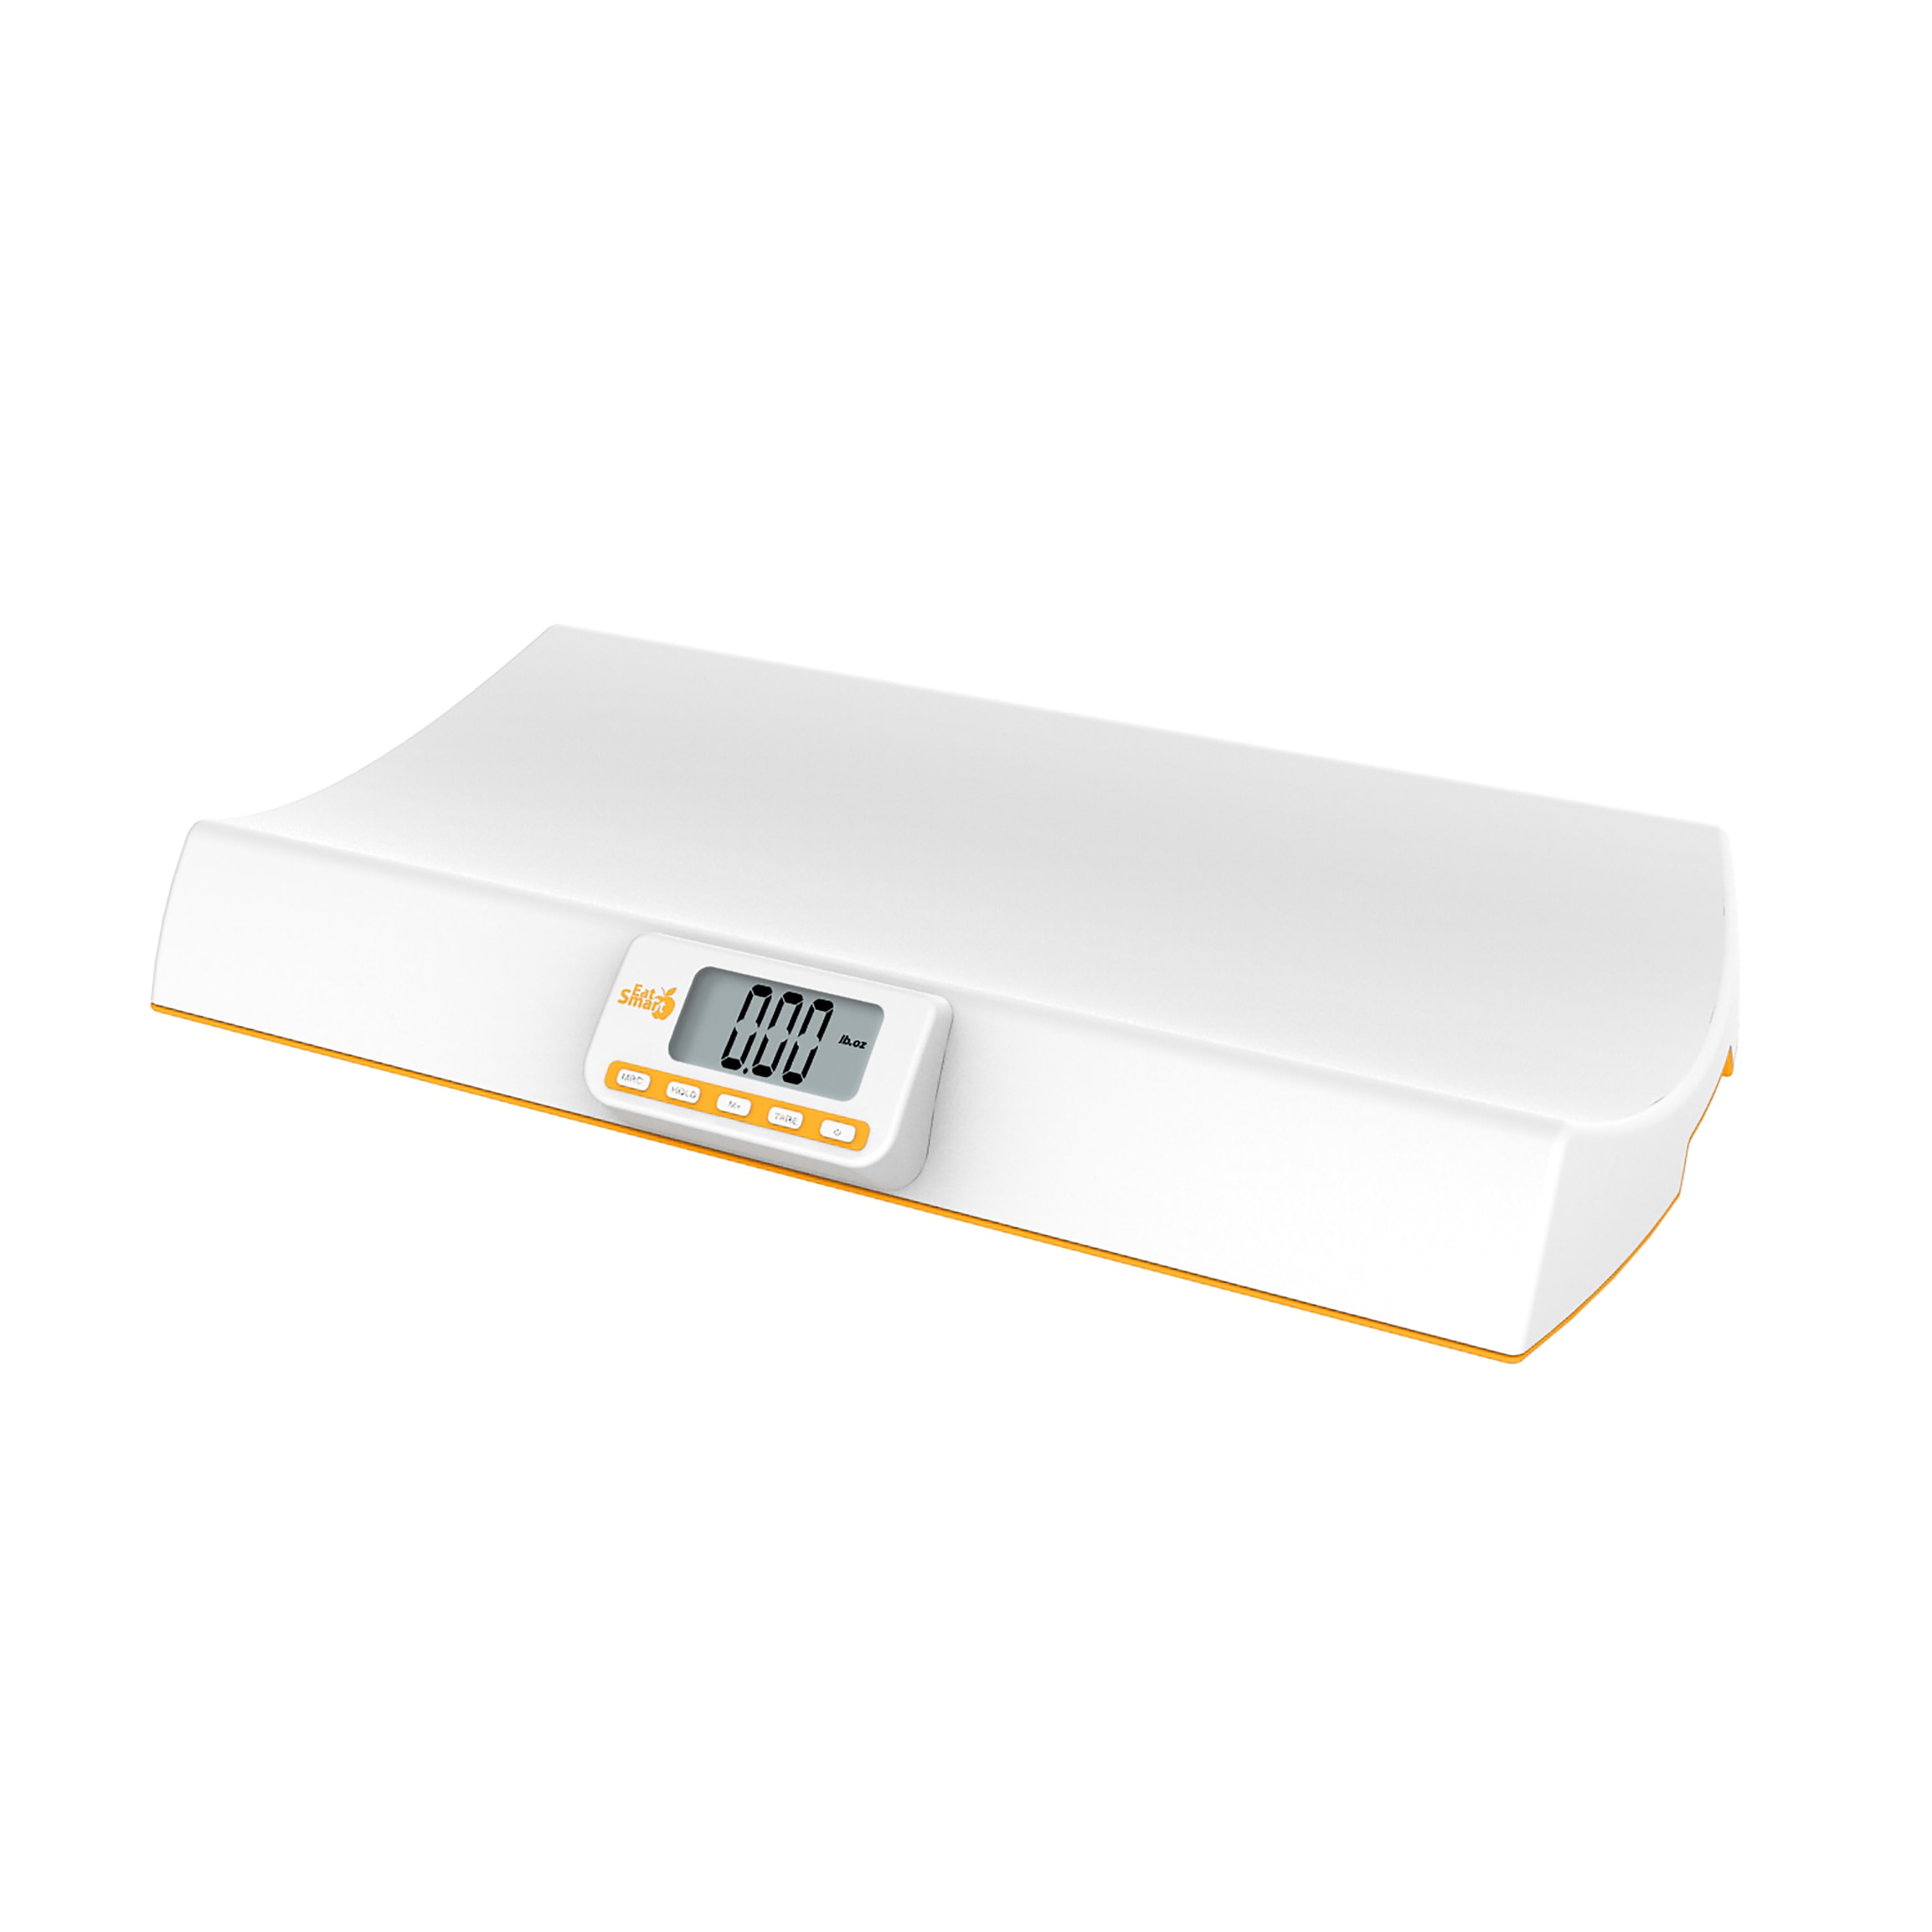 Monitor Your Baby or Pet's Weight with EatSmart Precision Baby and Pet  Check Scale #EatSmart #EatSmartScales #THB @EatSmartScales